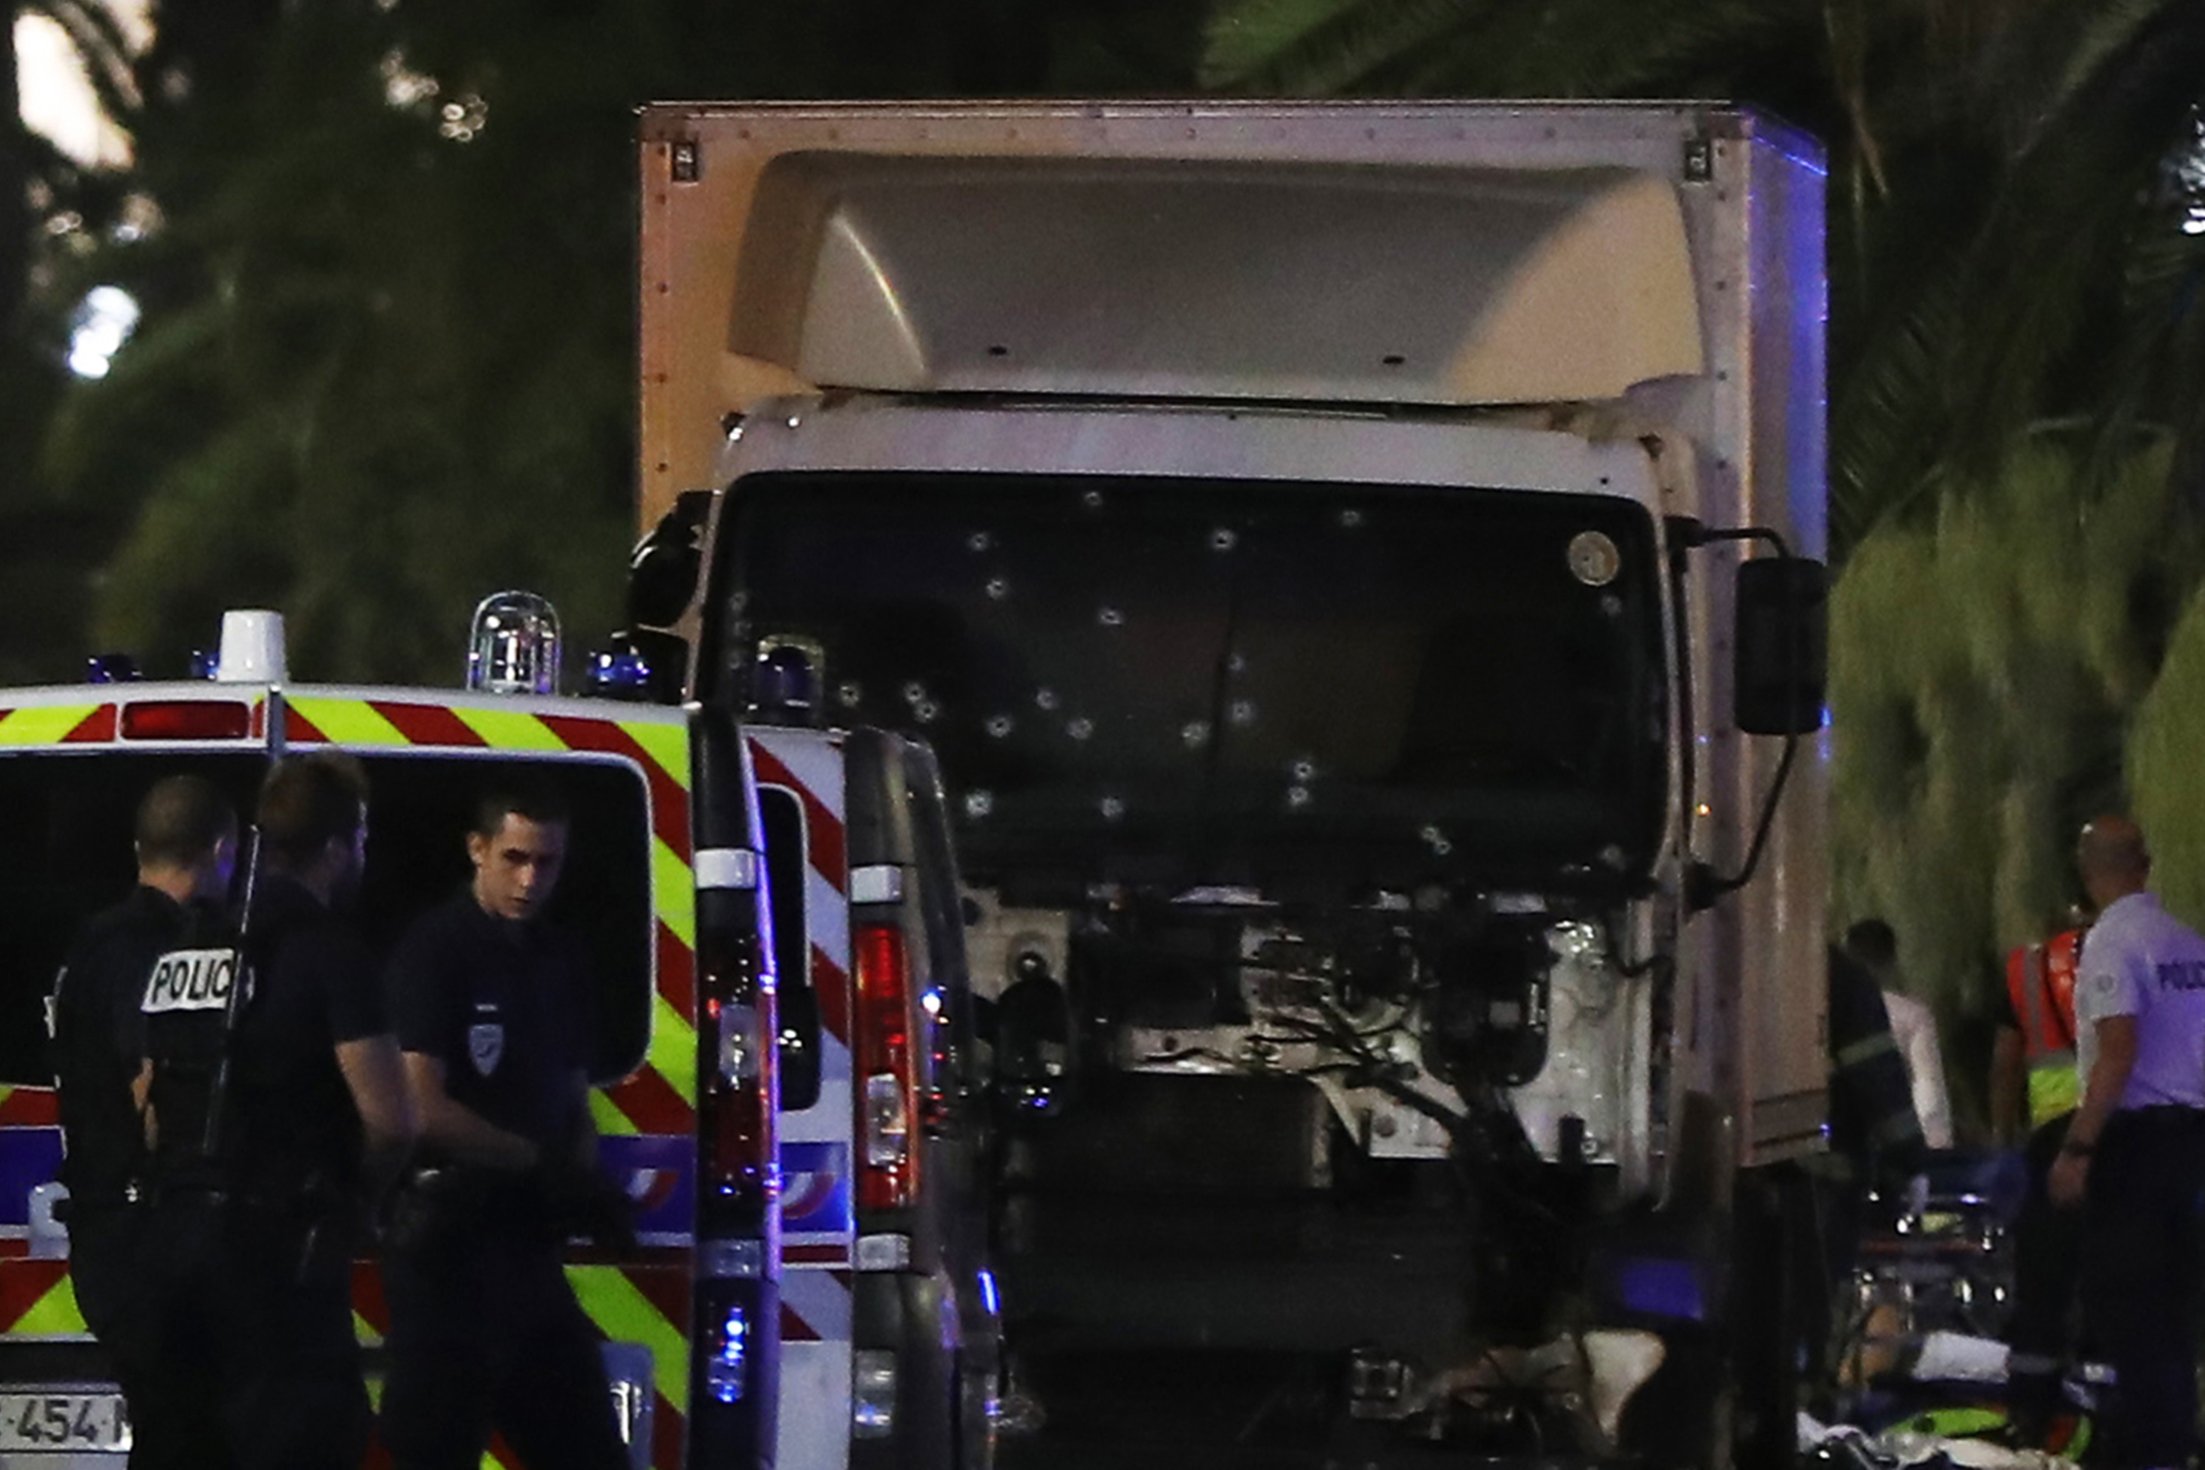 Police officers stand near a van, with its windscreen riddled with bullets, that tore into a crowd leaving a fireworks display in the French Riviera town of Nice on July 14, 2016. At least 70 people were killed in the French city of Nice on Thursday after officials and authorities said a truck slammed into a crowd celebrating Bastille Day. Photographs from the immediate aftermath showed several dead bodies on a main street in the city, which lies on the coast of the Mediterranean, as well as a truck that had its windshield riddled with bullet holes. Bodies that had already been attended to were wrapped in gold sheets.